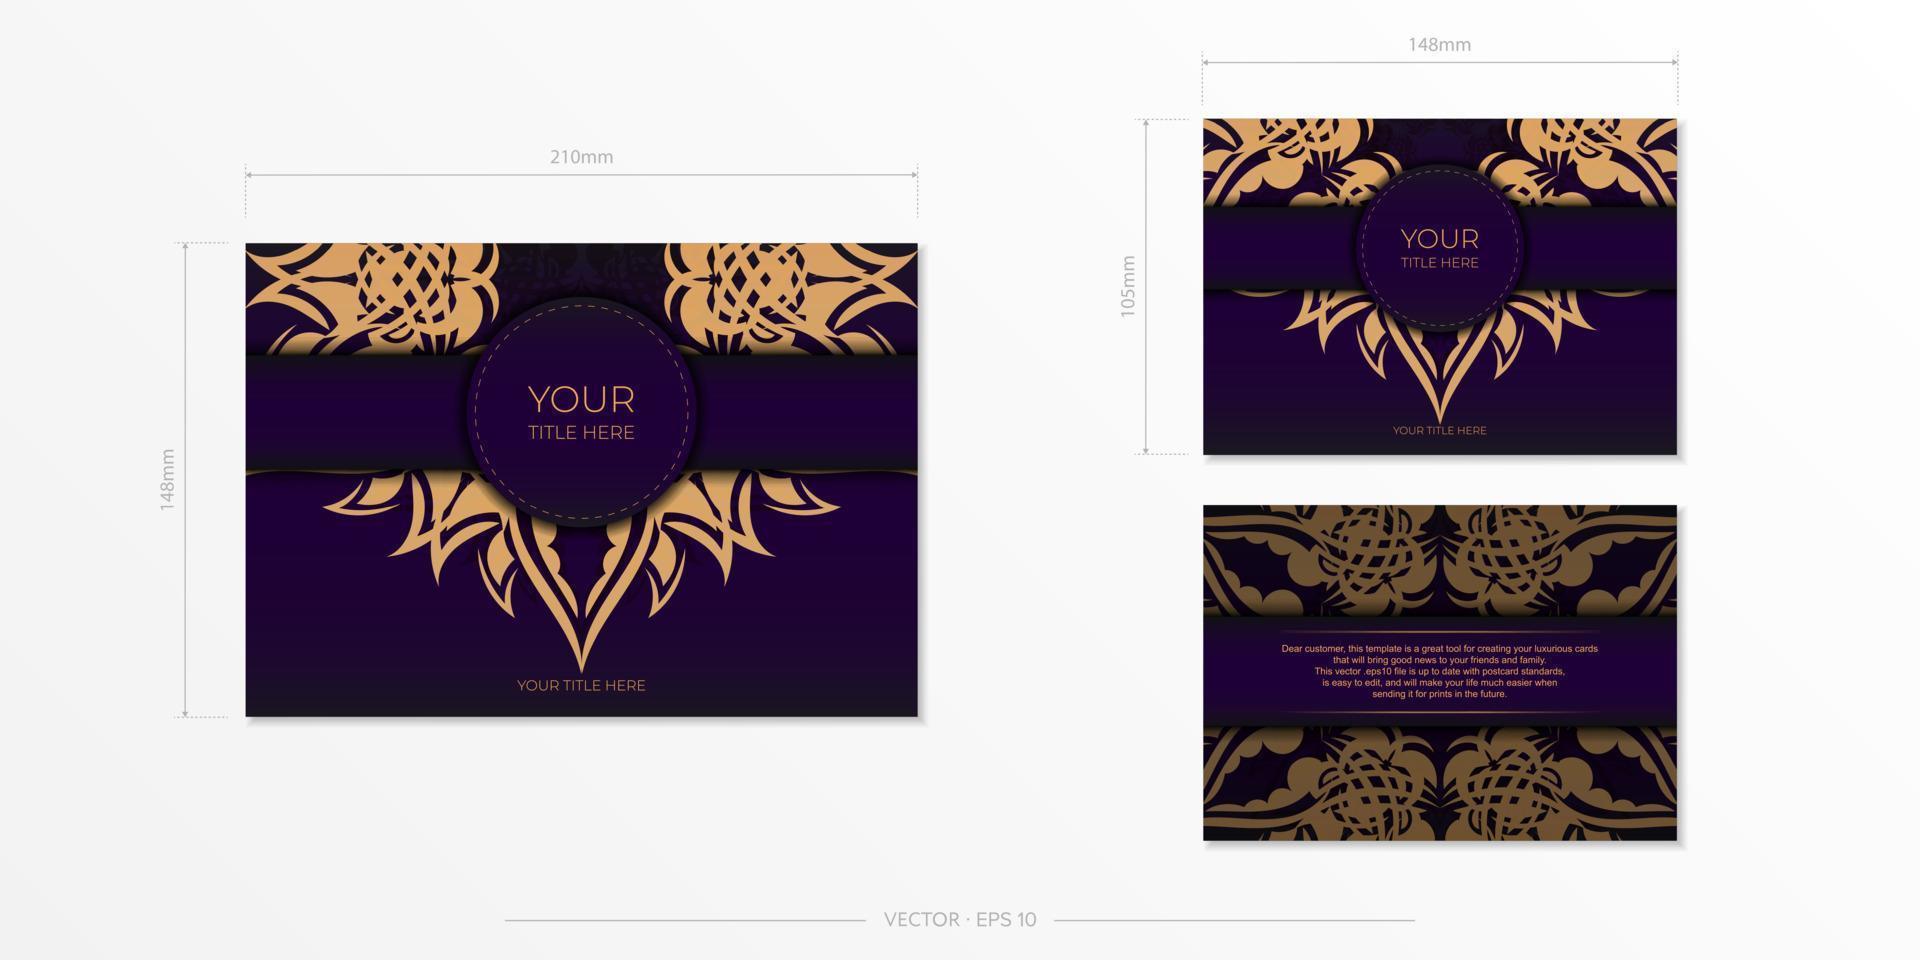 Luxurious purple rectangular postcard template with vintage indian mandala ornament. Elegant and classic vector elements ready for print and typography.